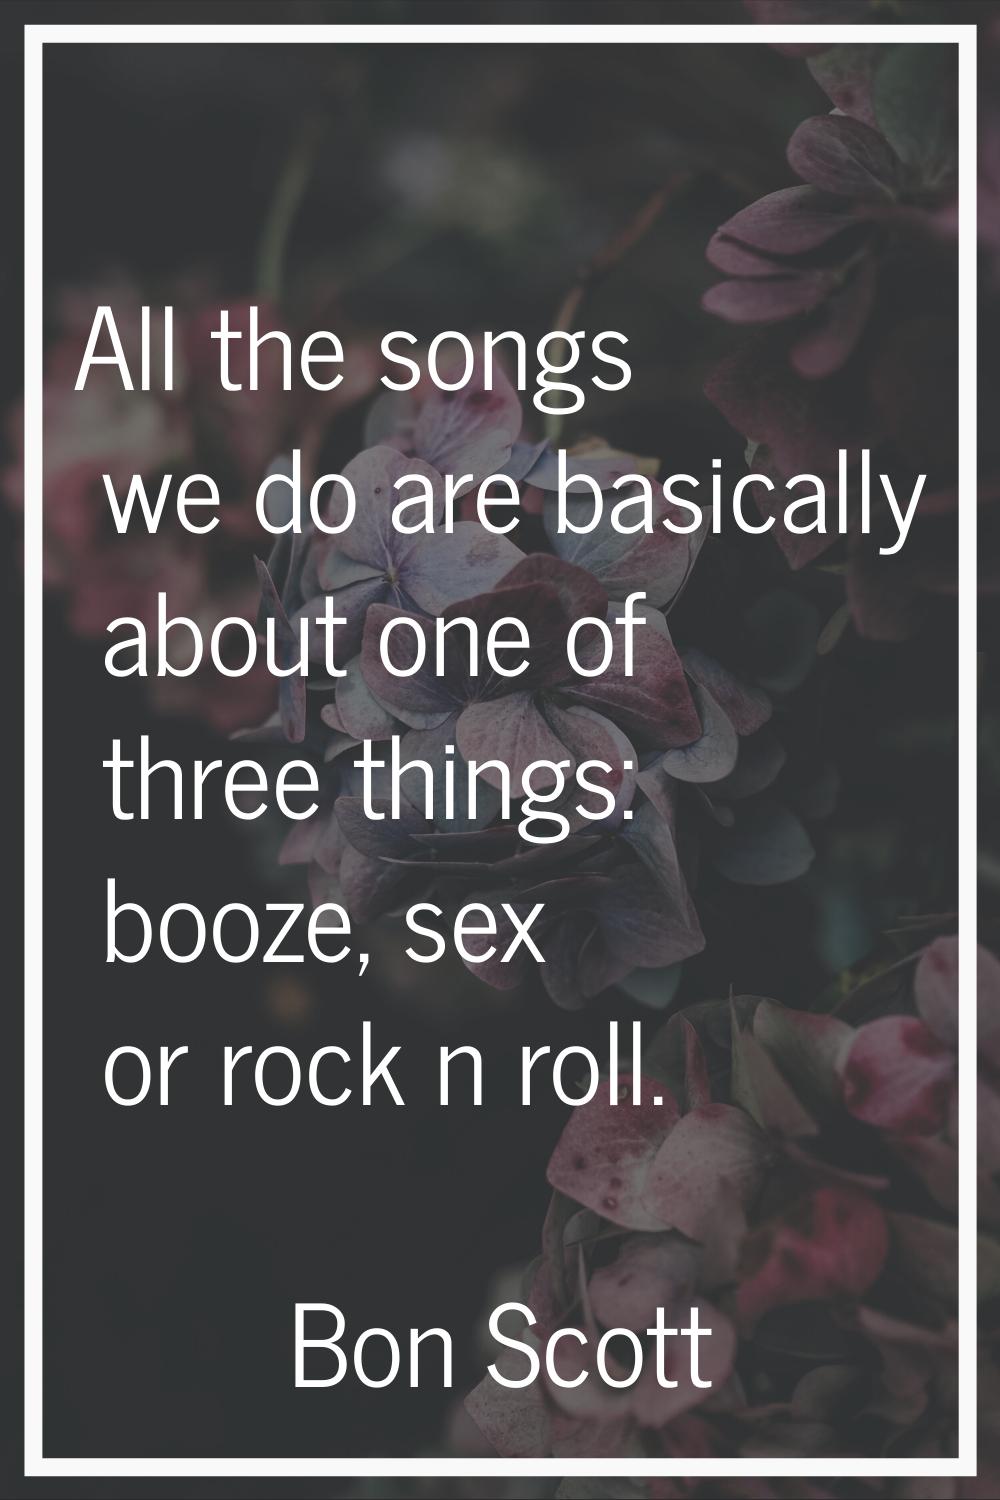 All the songs we do are basically about one of three things: booze, sex or rock n roll.